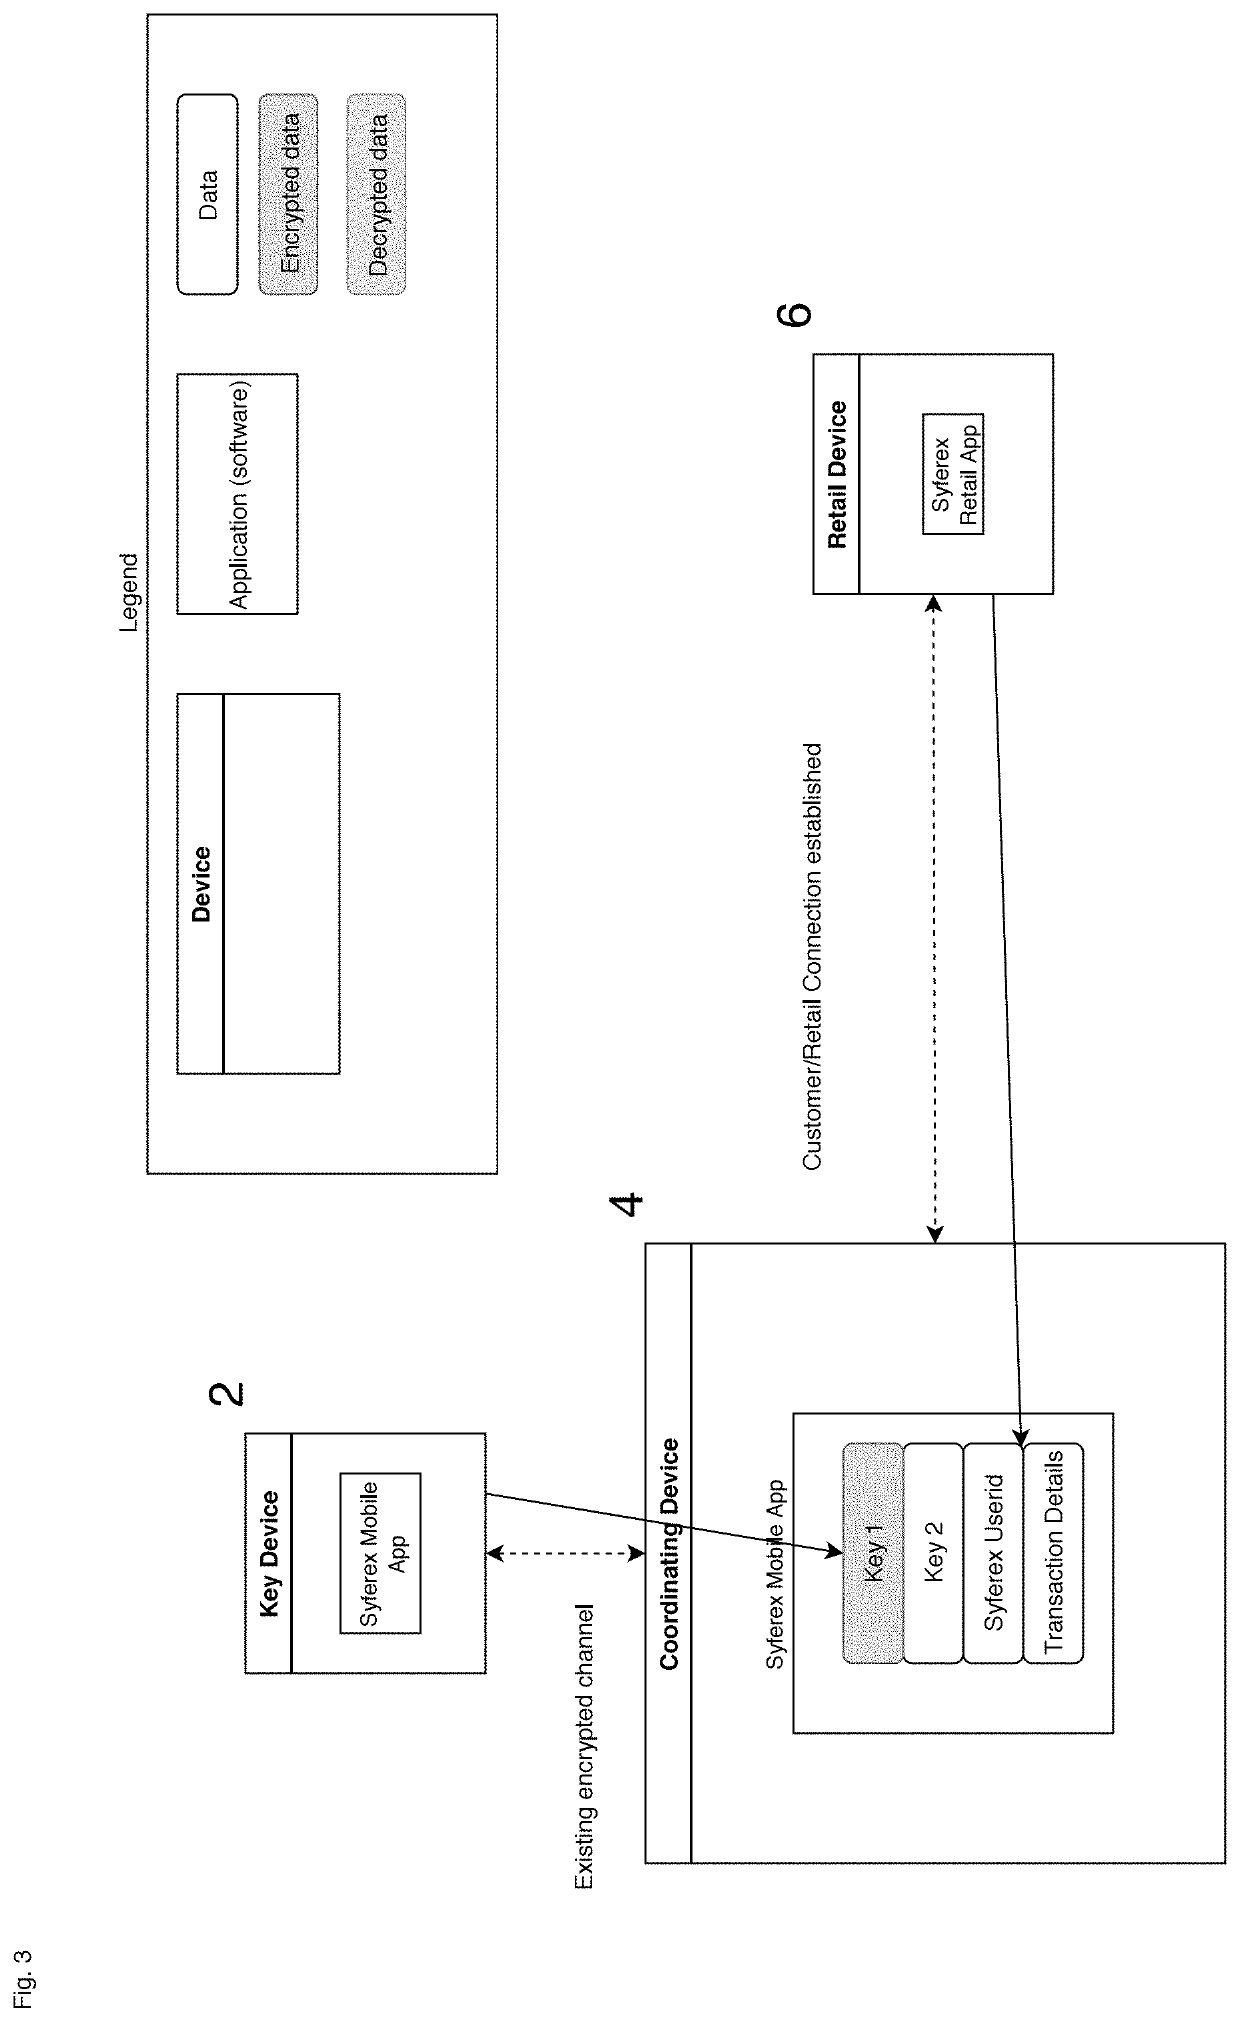 Authentication system using paired, role reversing personal devices